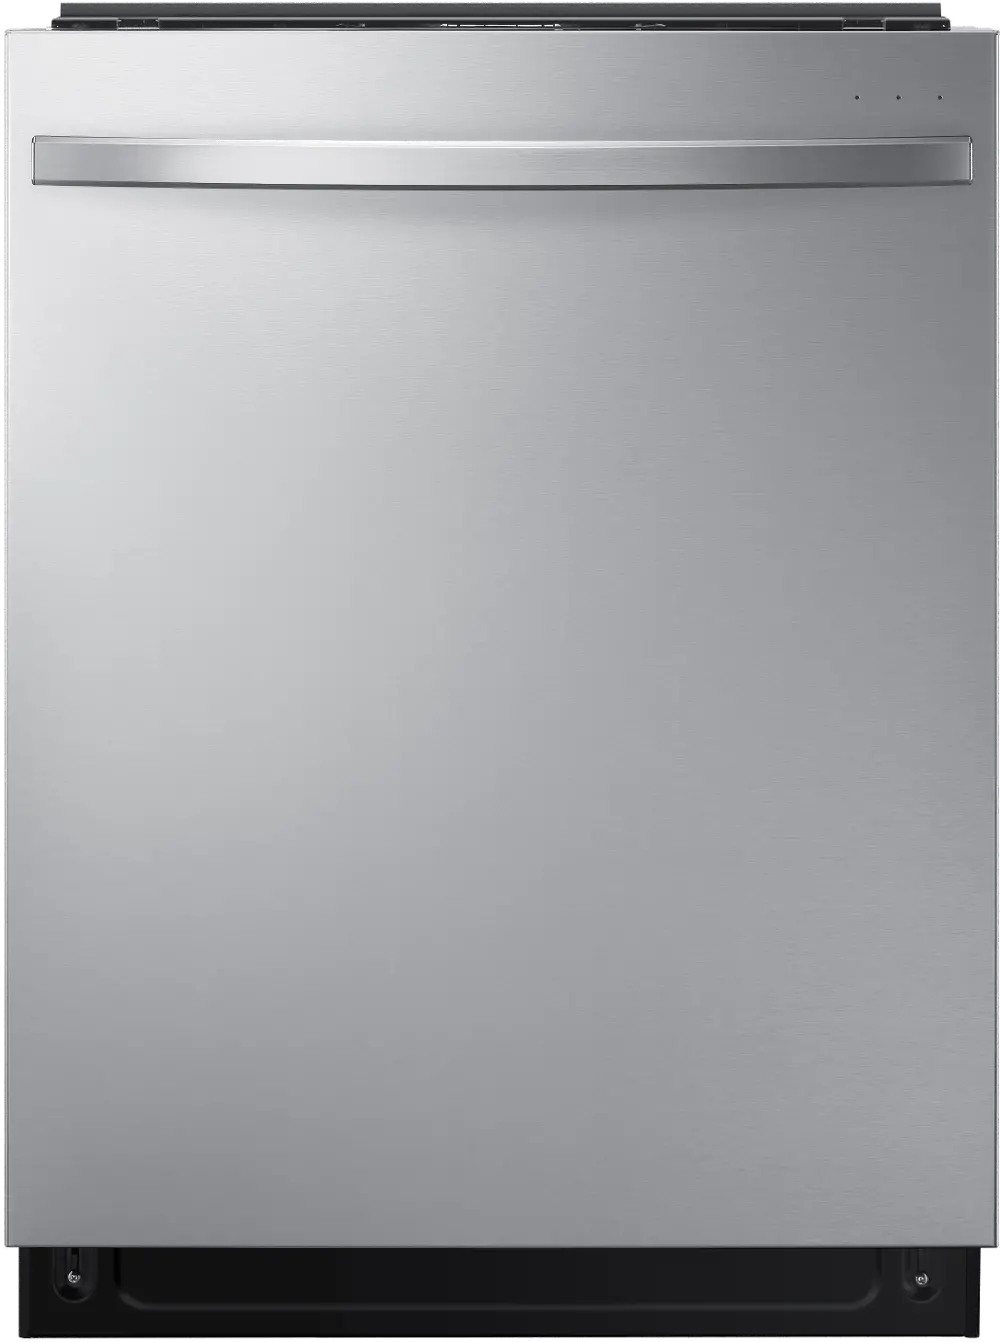 DW80R7061US Samsung Top Control Dishwasher - Stainless Steel-1